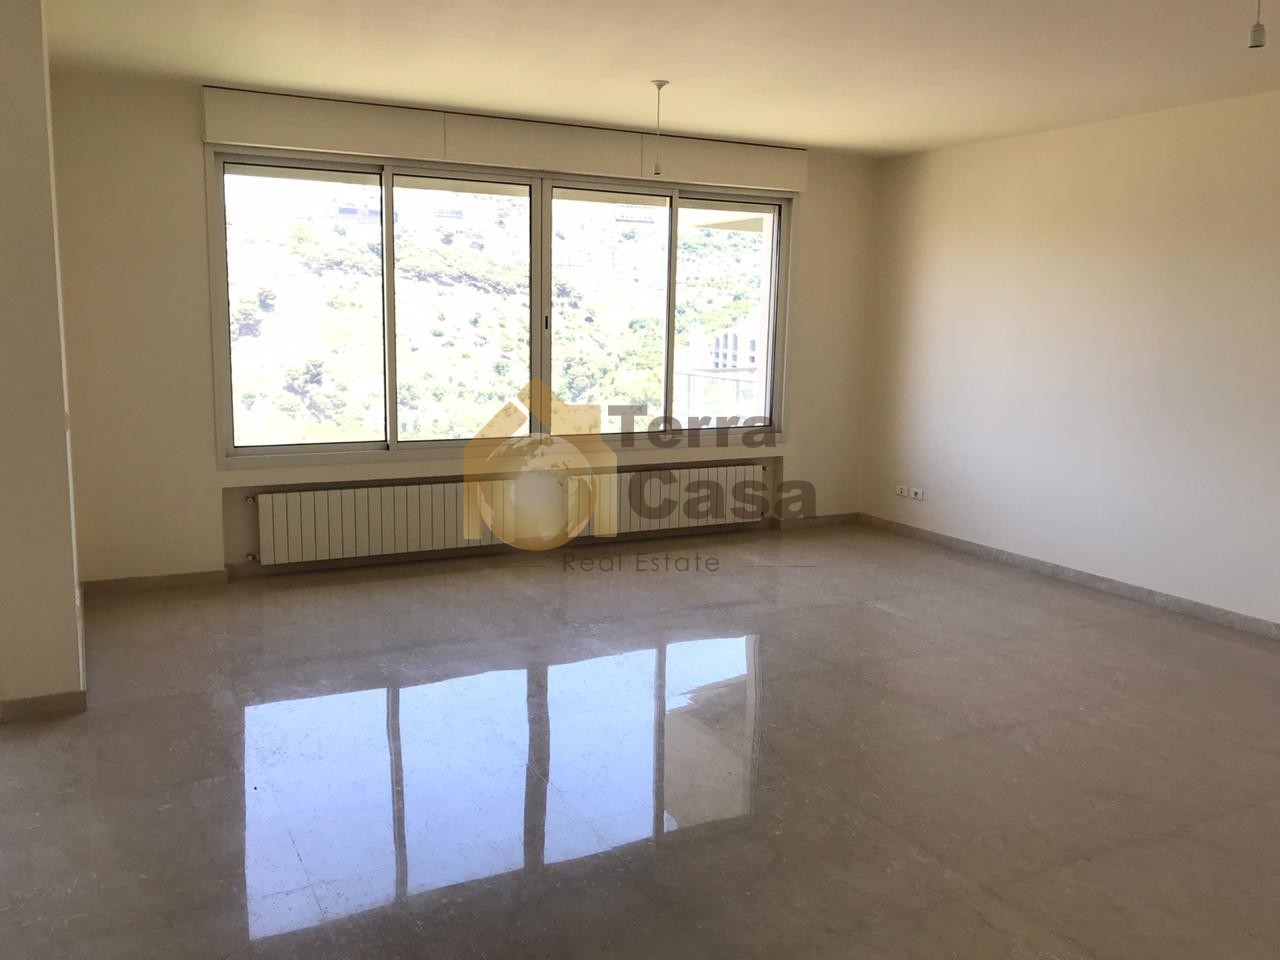 Luxurious brand new apartment cash payment. Ref# 2719